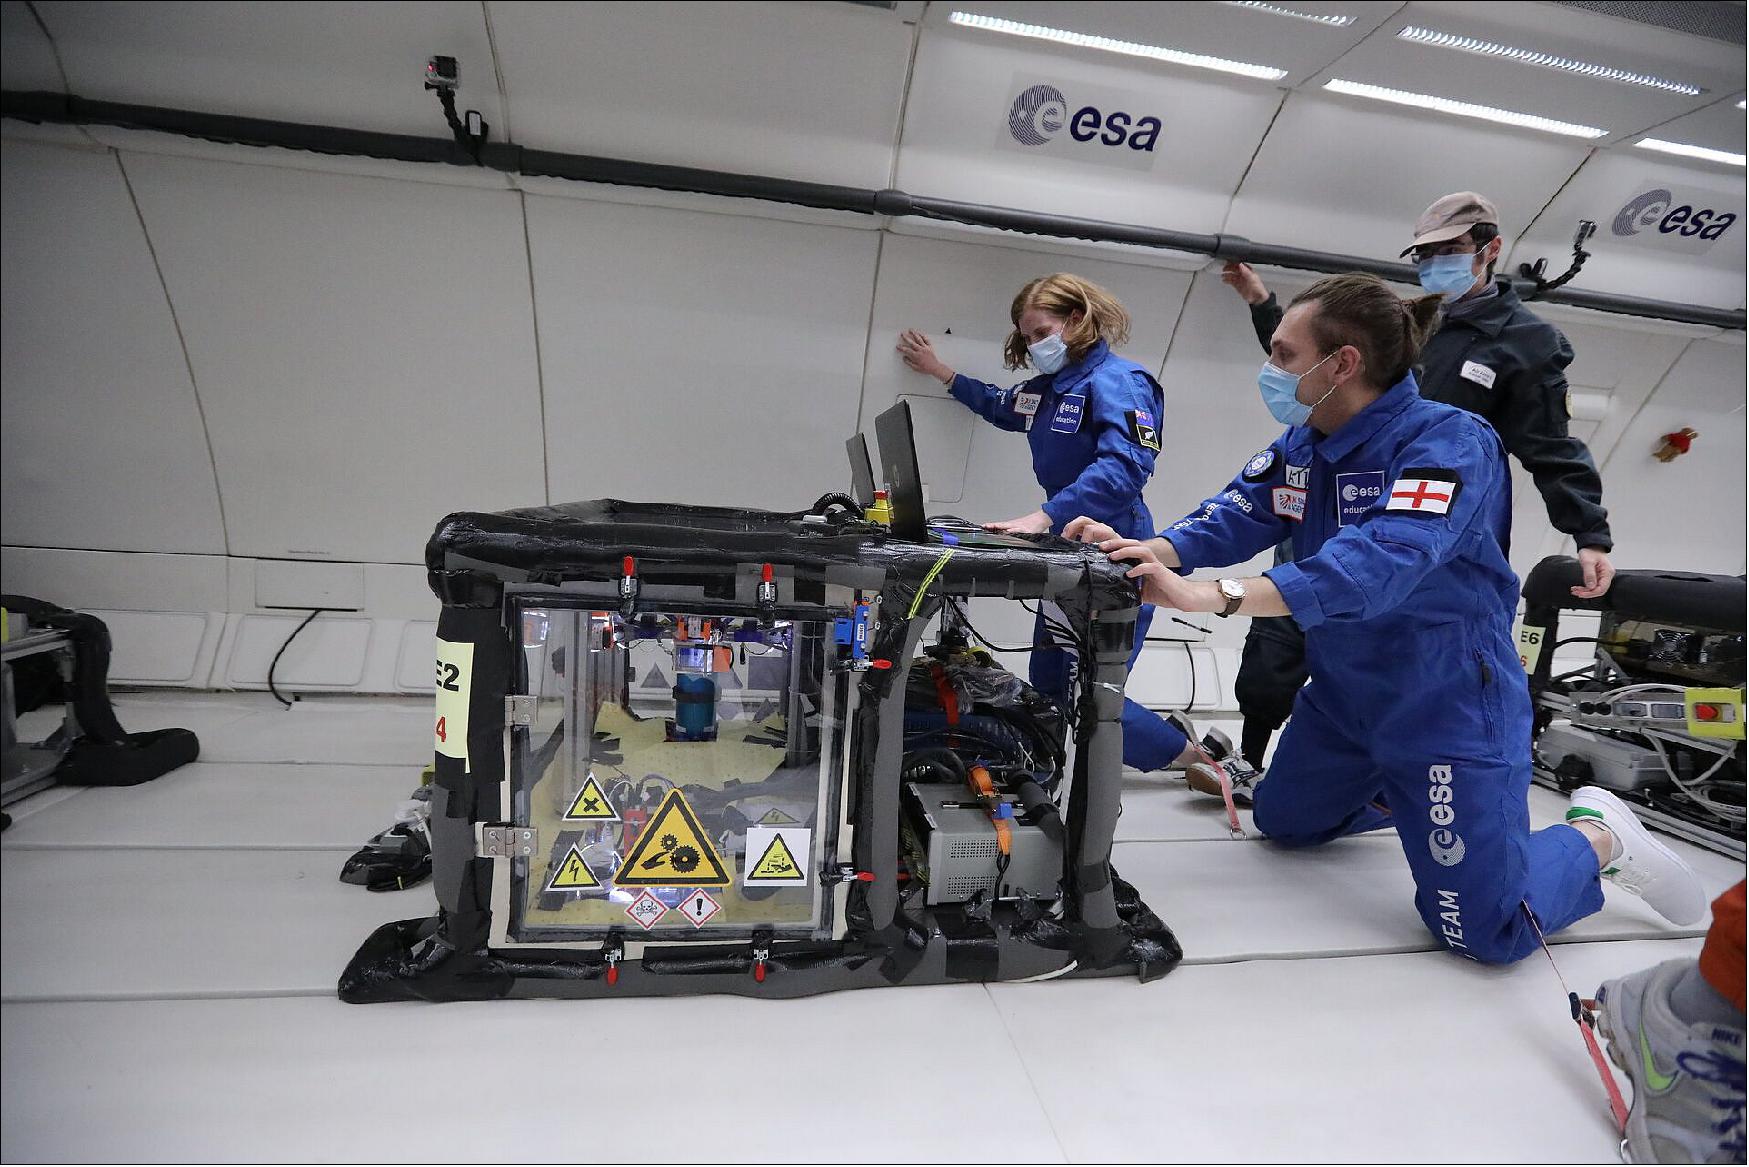 Figure 9: RELOX team in weightlessness being inspected by a Novespace engineer (image credit: Novespace)